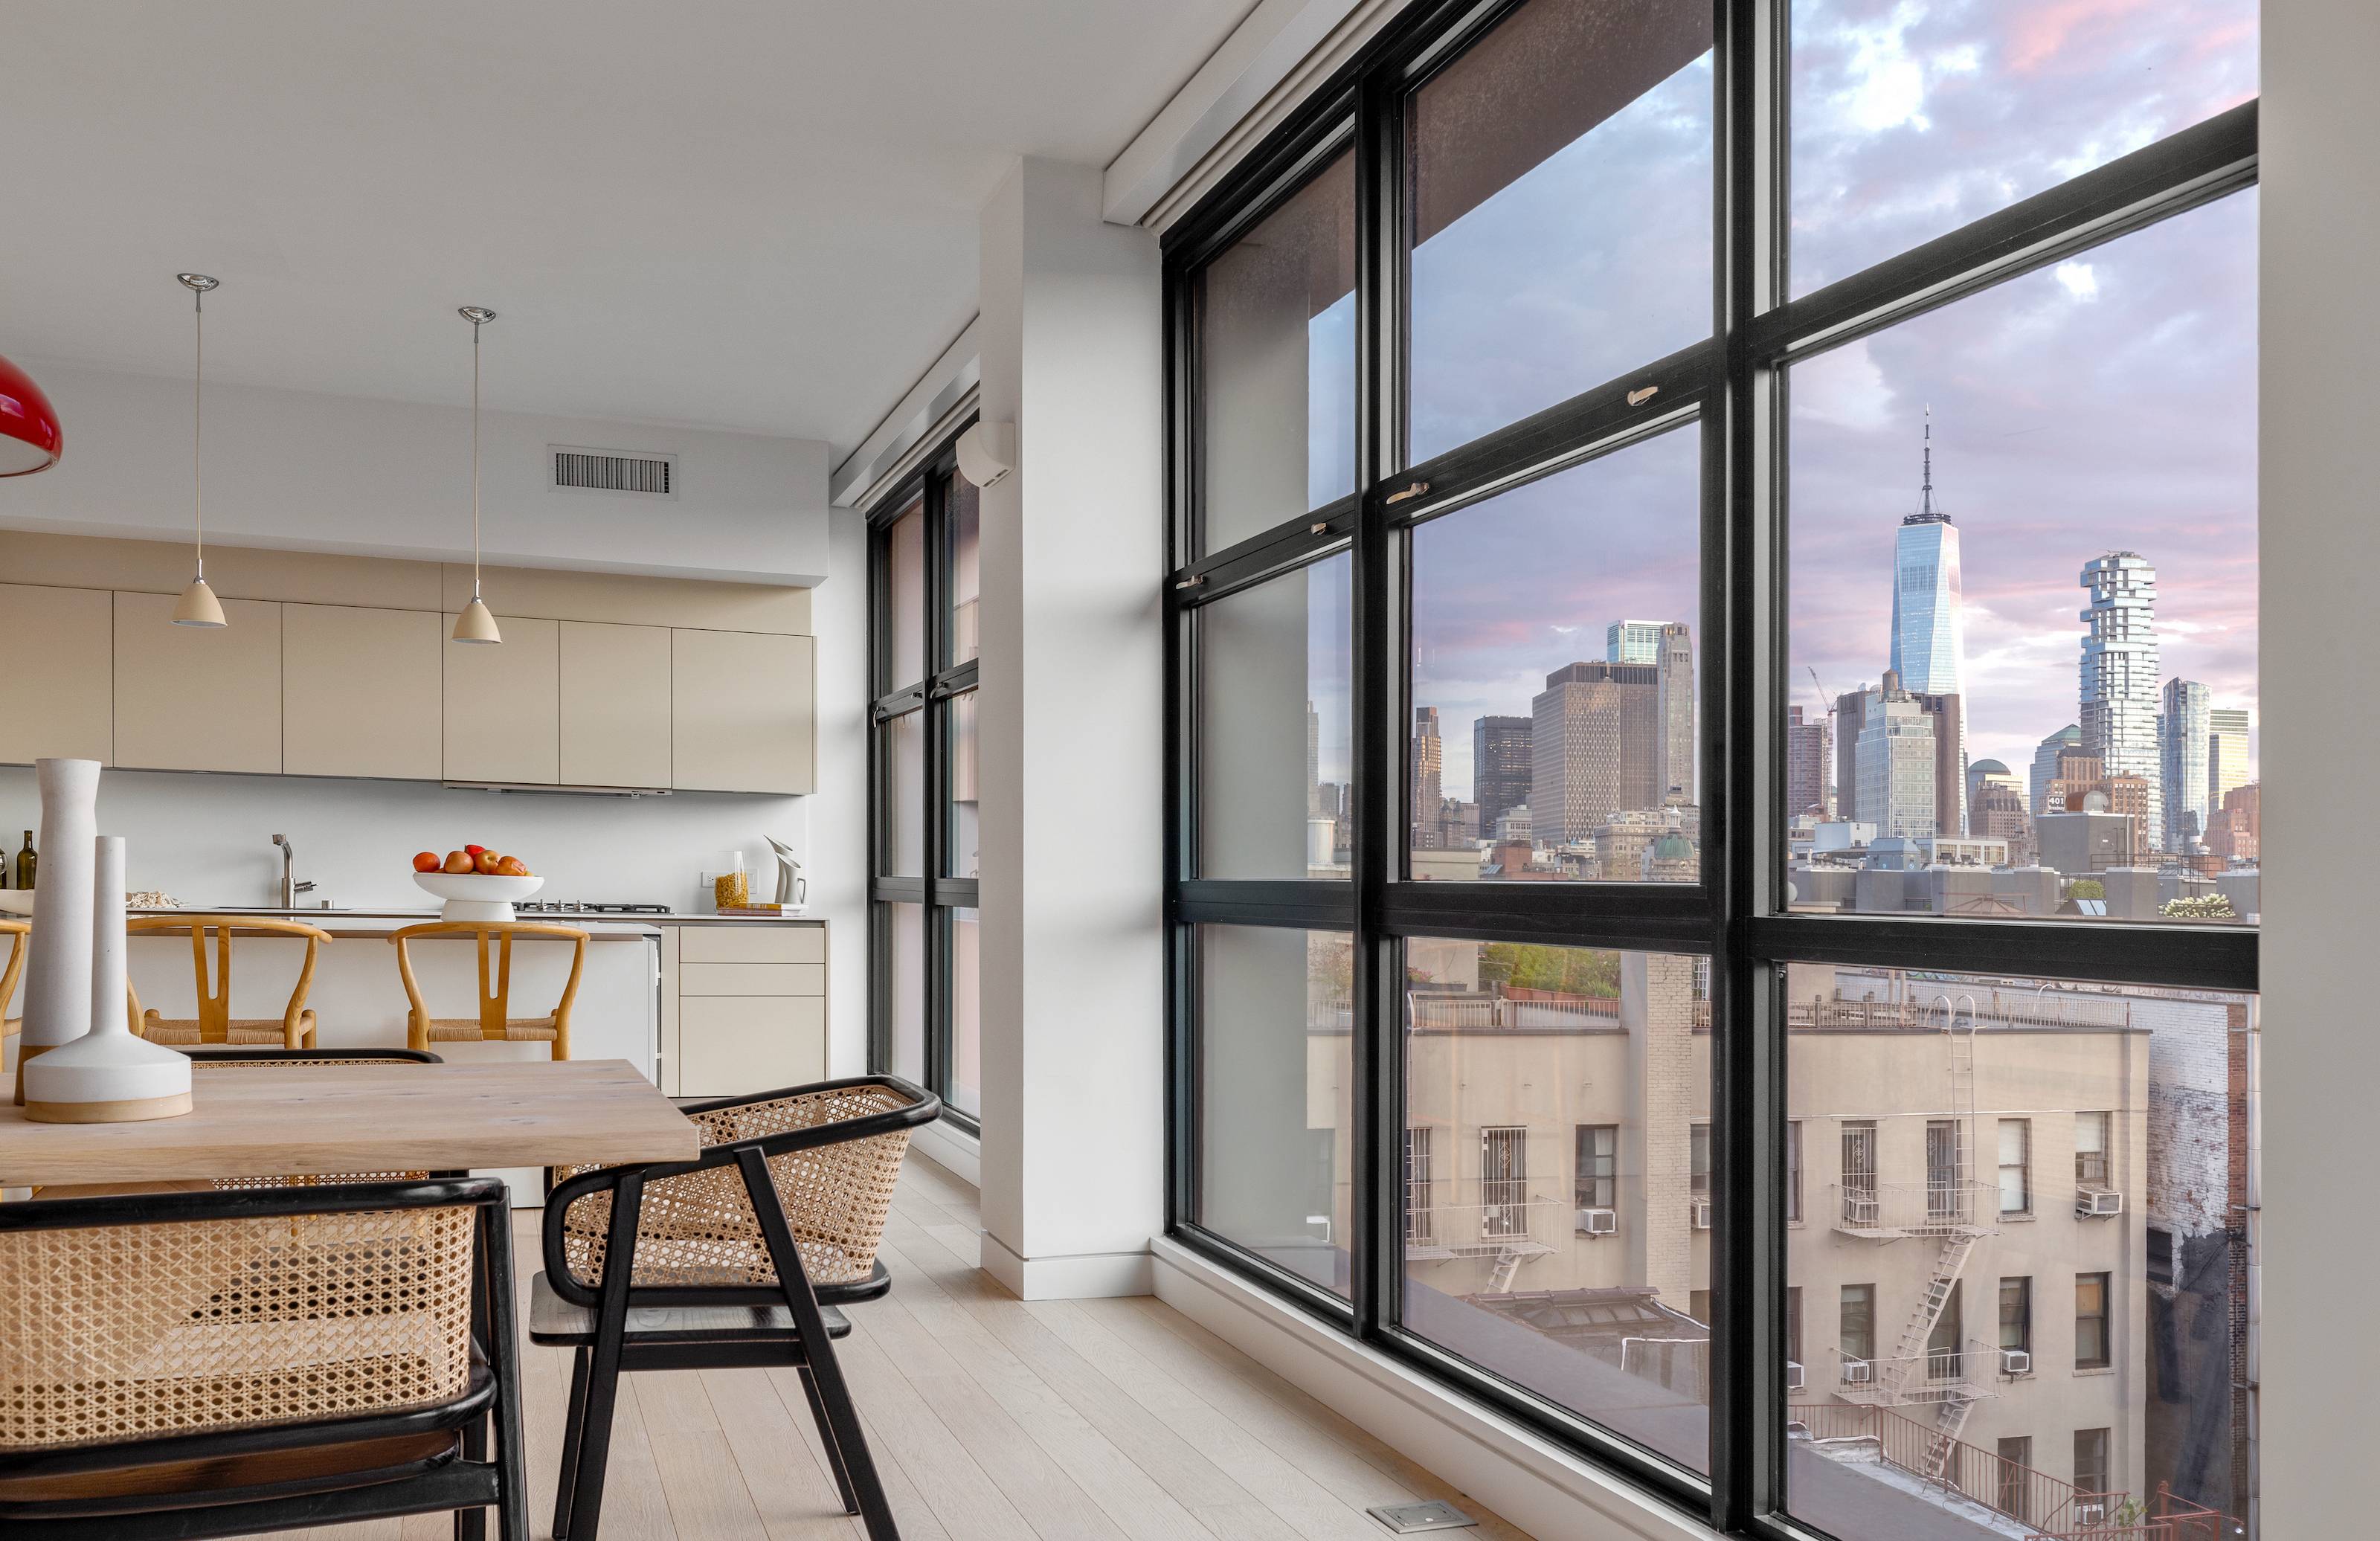 Prime NoLita Penthouse. Nestled in the heart of exclusive NoLita, Penthouse D is the crown jewel of 250 Bowery and is available for resale for the first time.